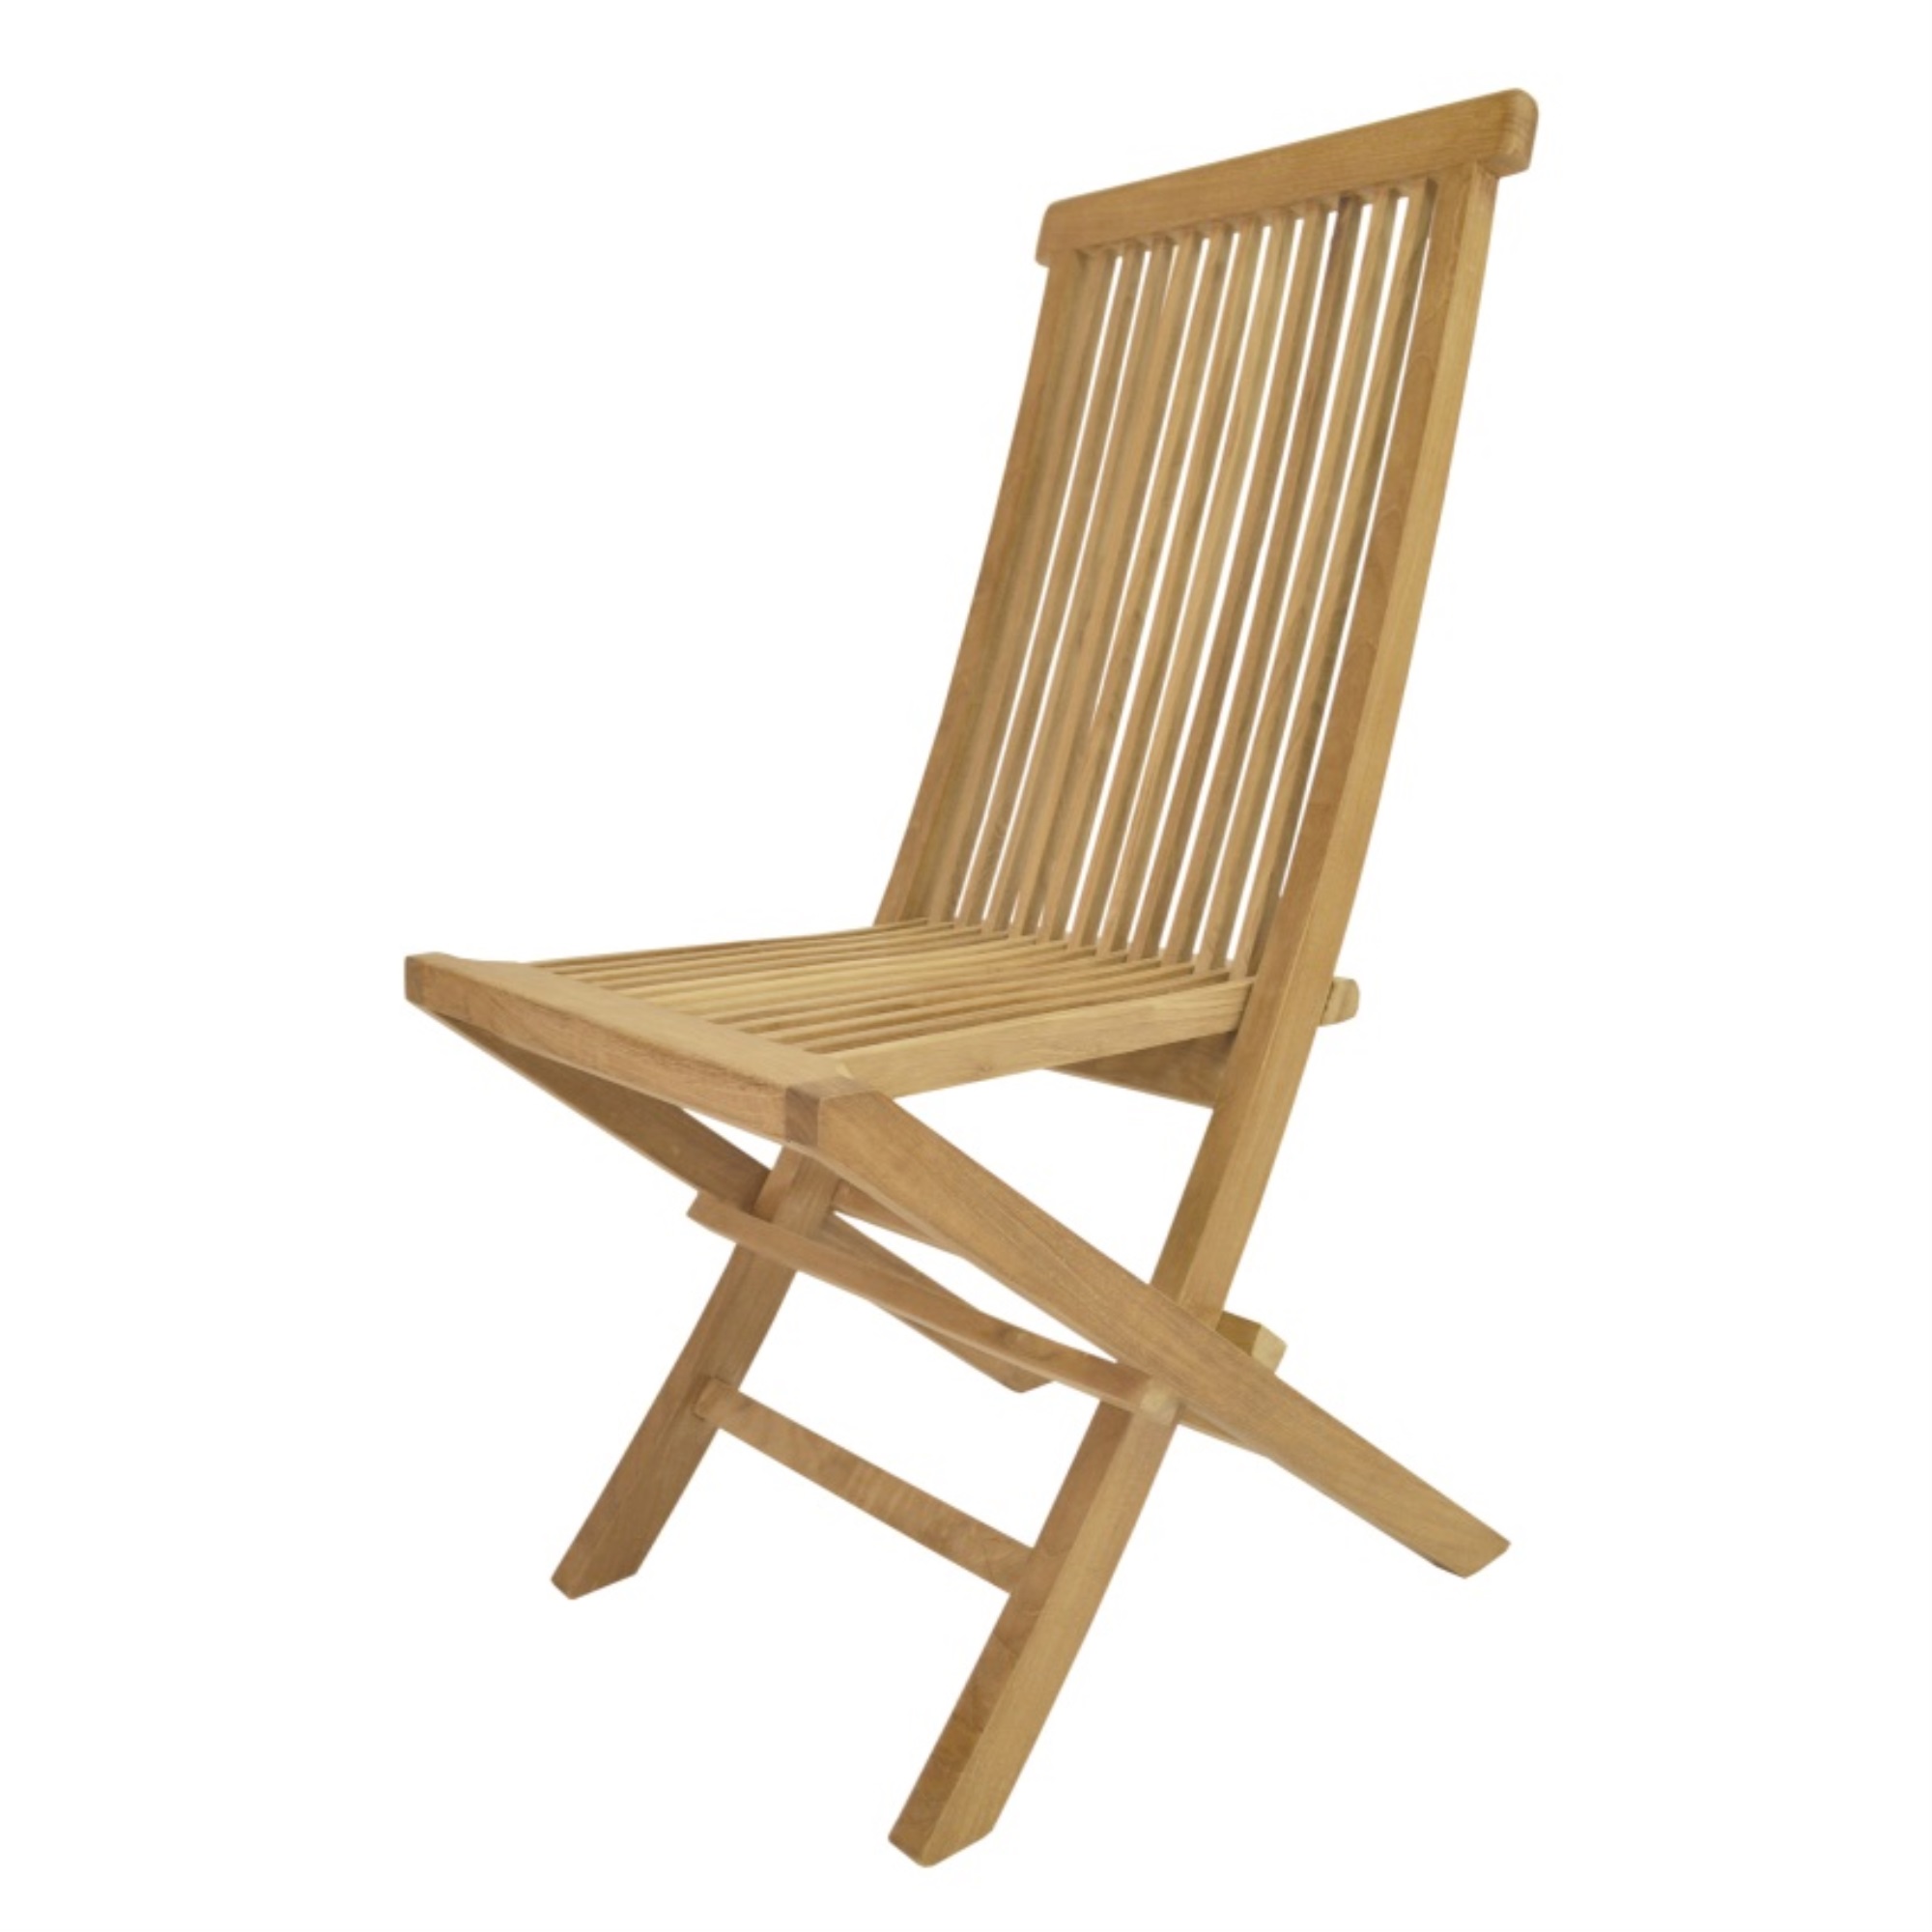 Anderson Teak Classic Folding Chair - image 2 of 5